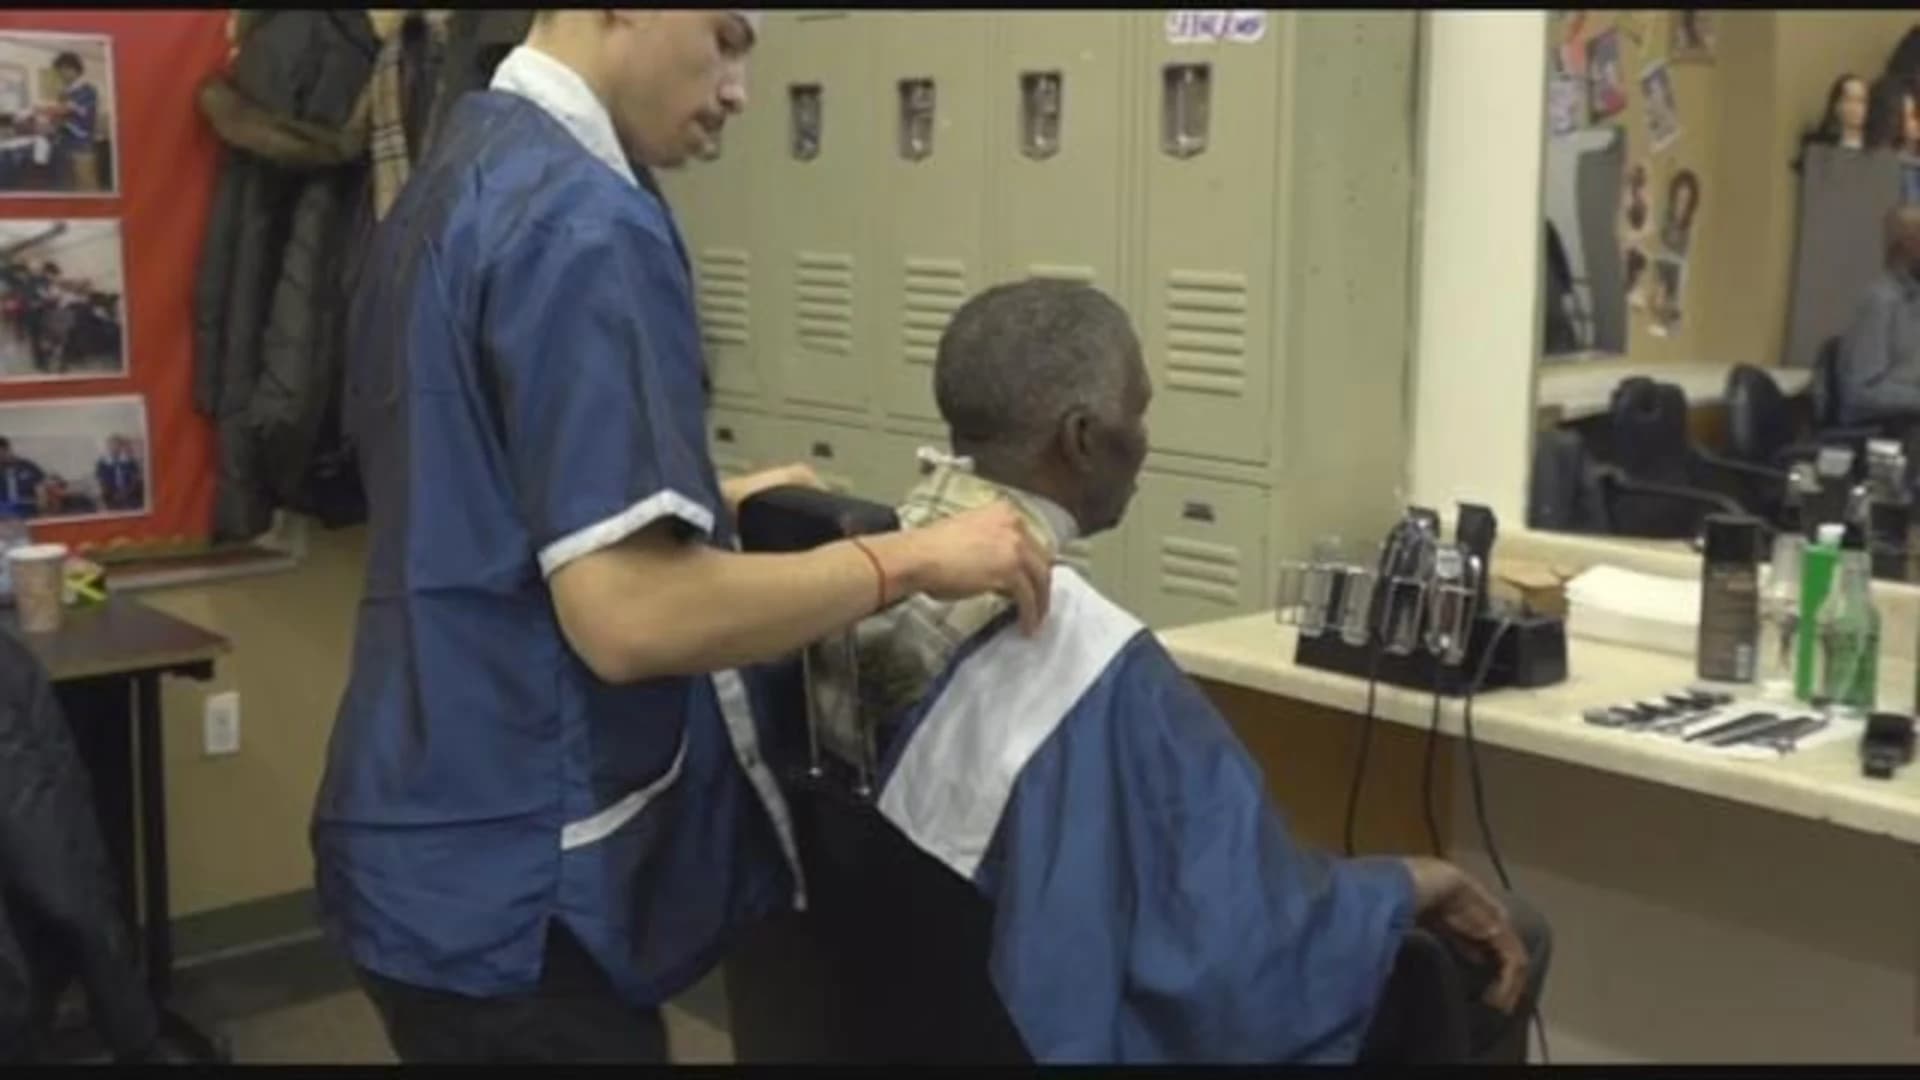 Bronx school teaches students with disabilities barber skills